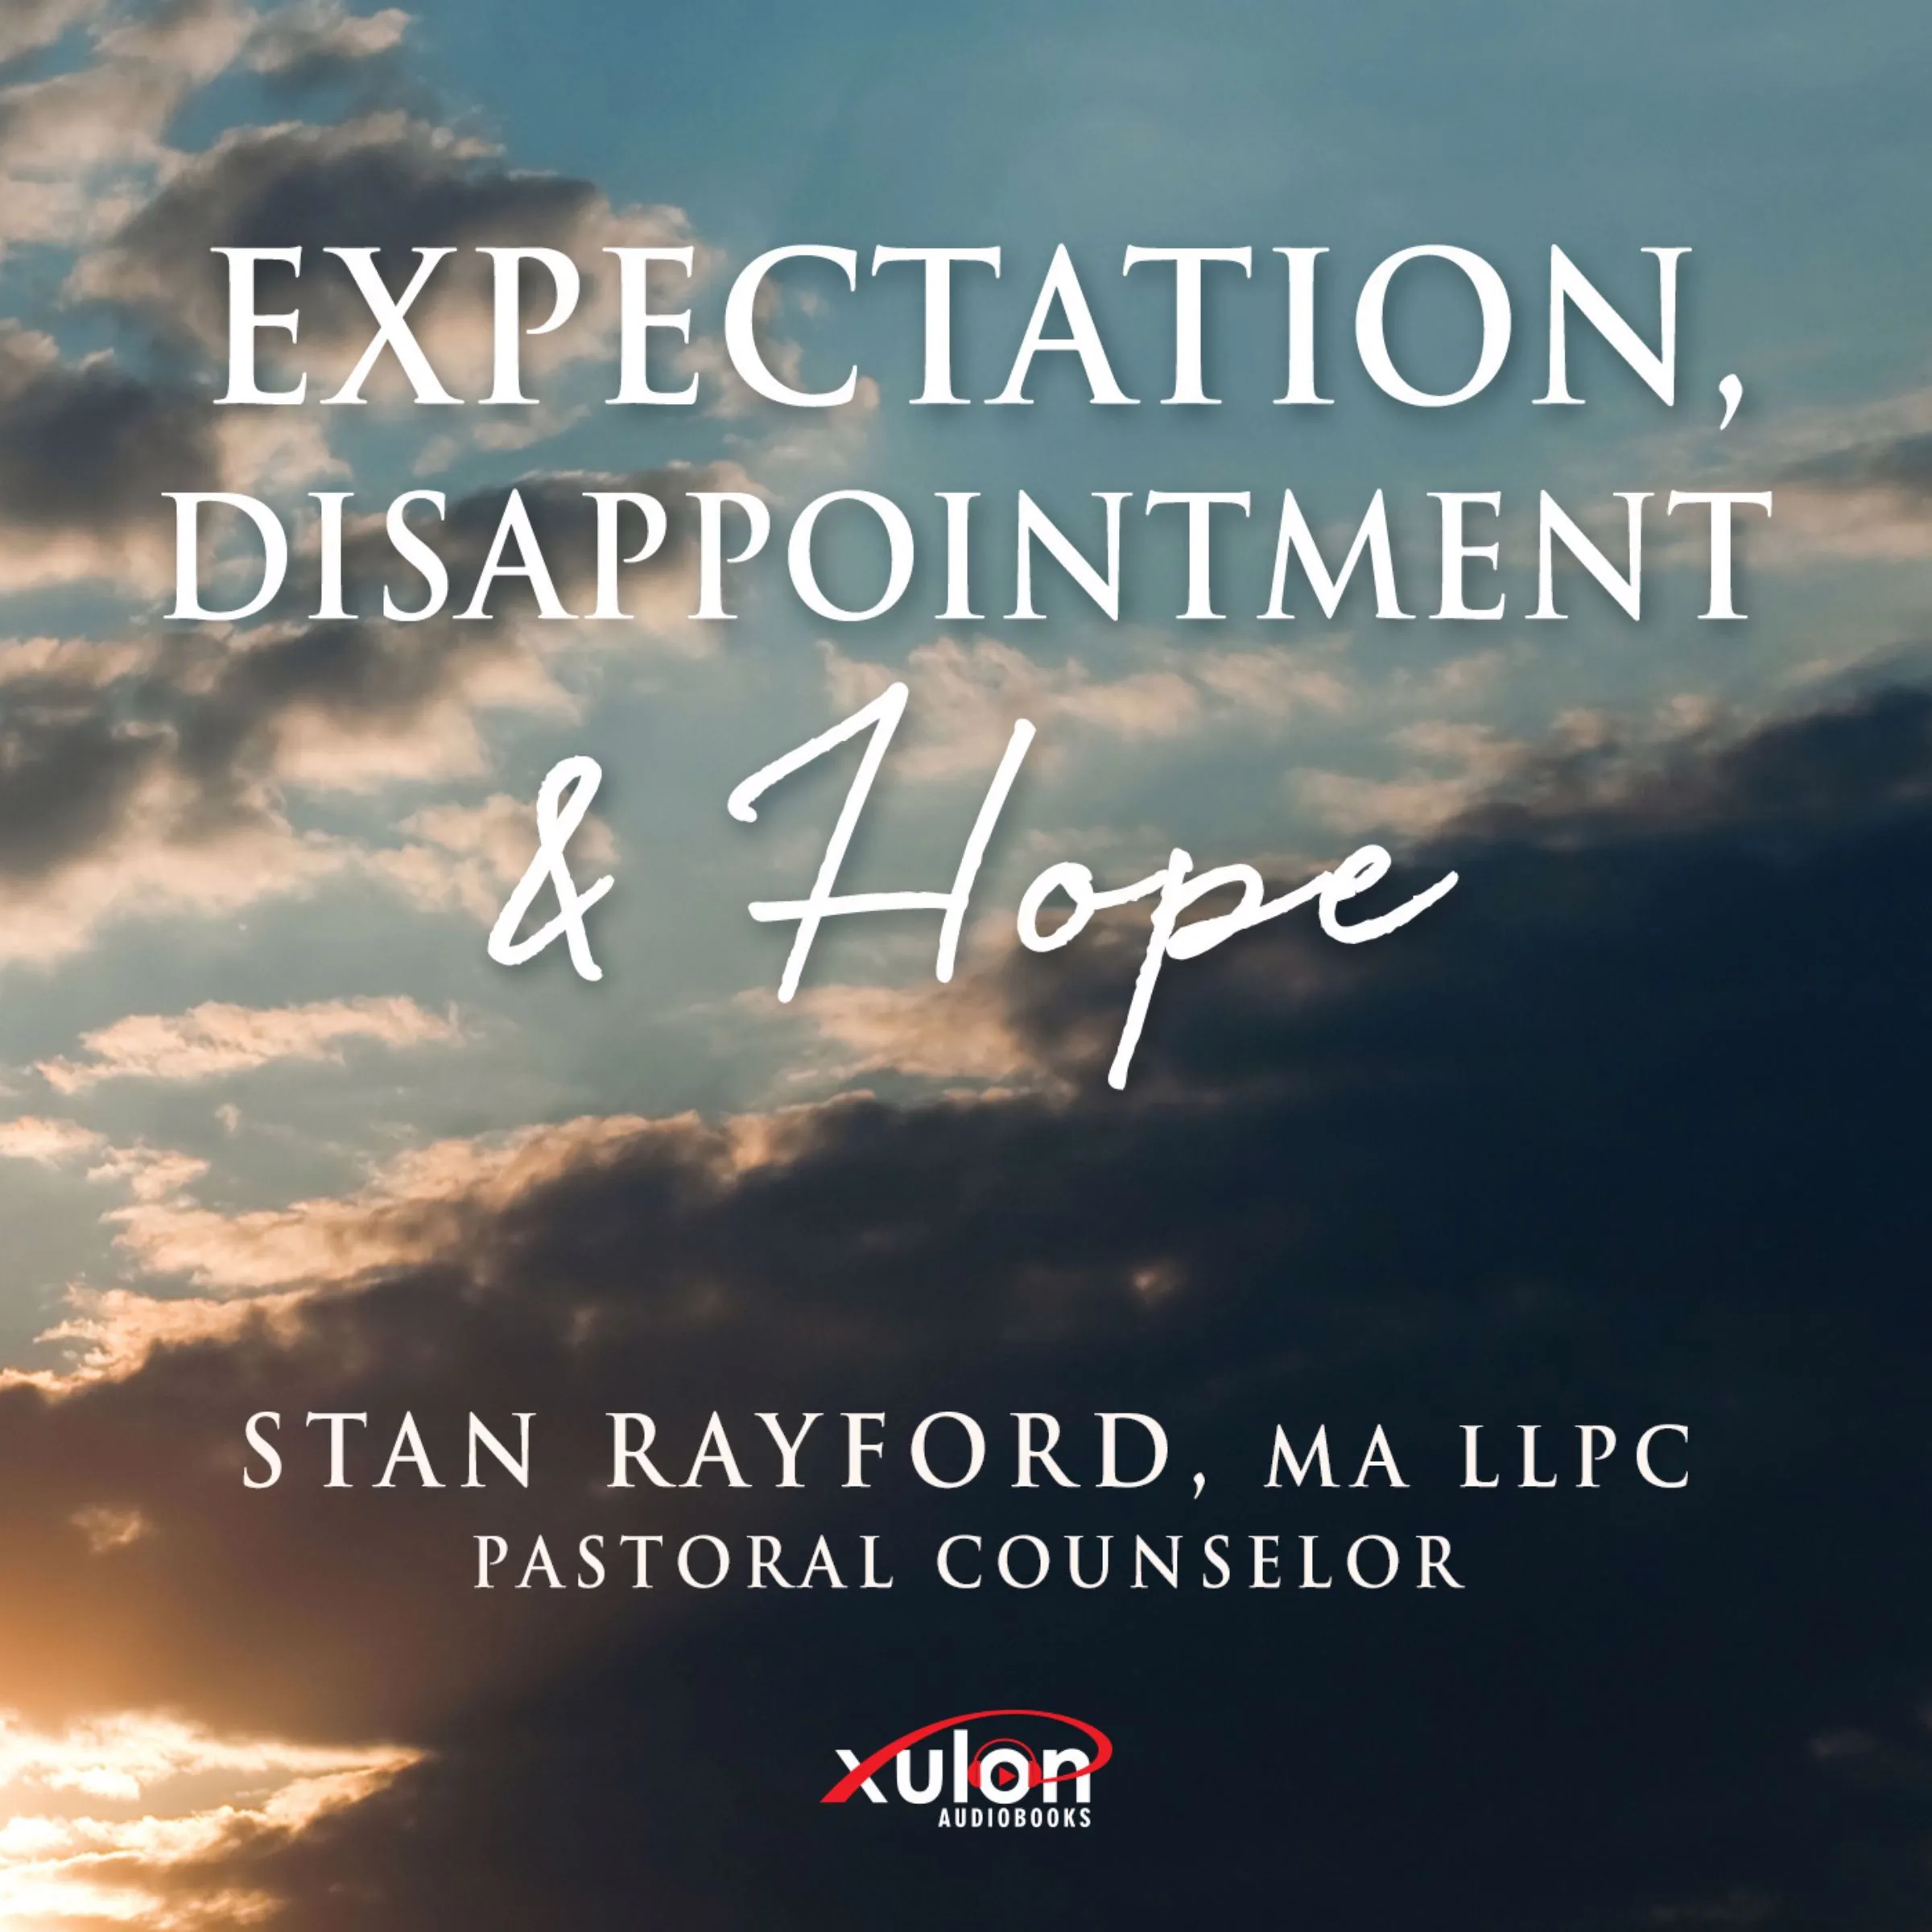 Expectation, Disappointment & Hope Audiobook by Stan Rayford